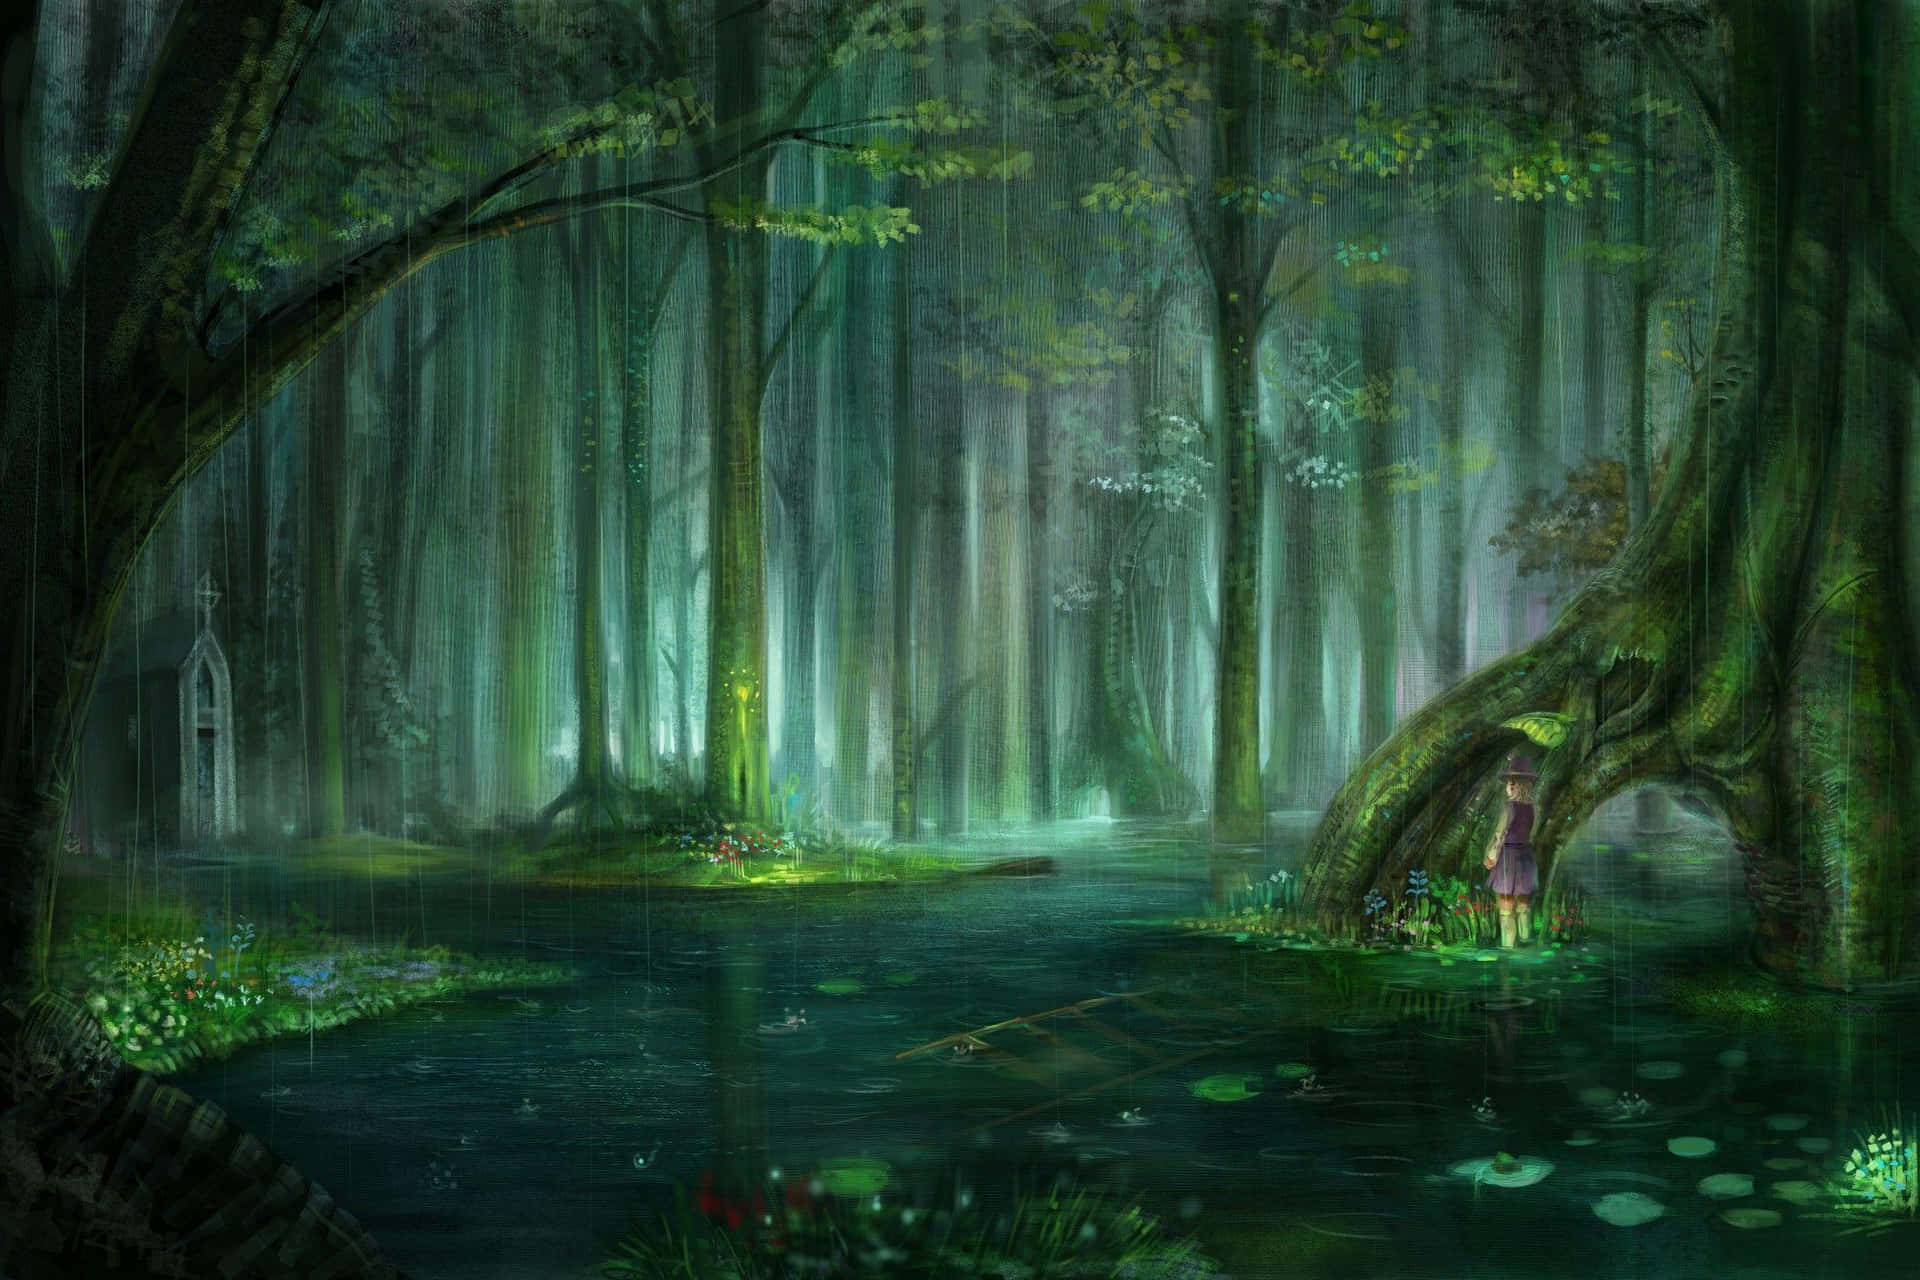 A Painting Of A Forest With A Person Standing In The Water